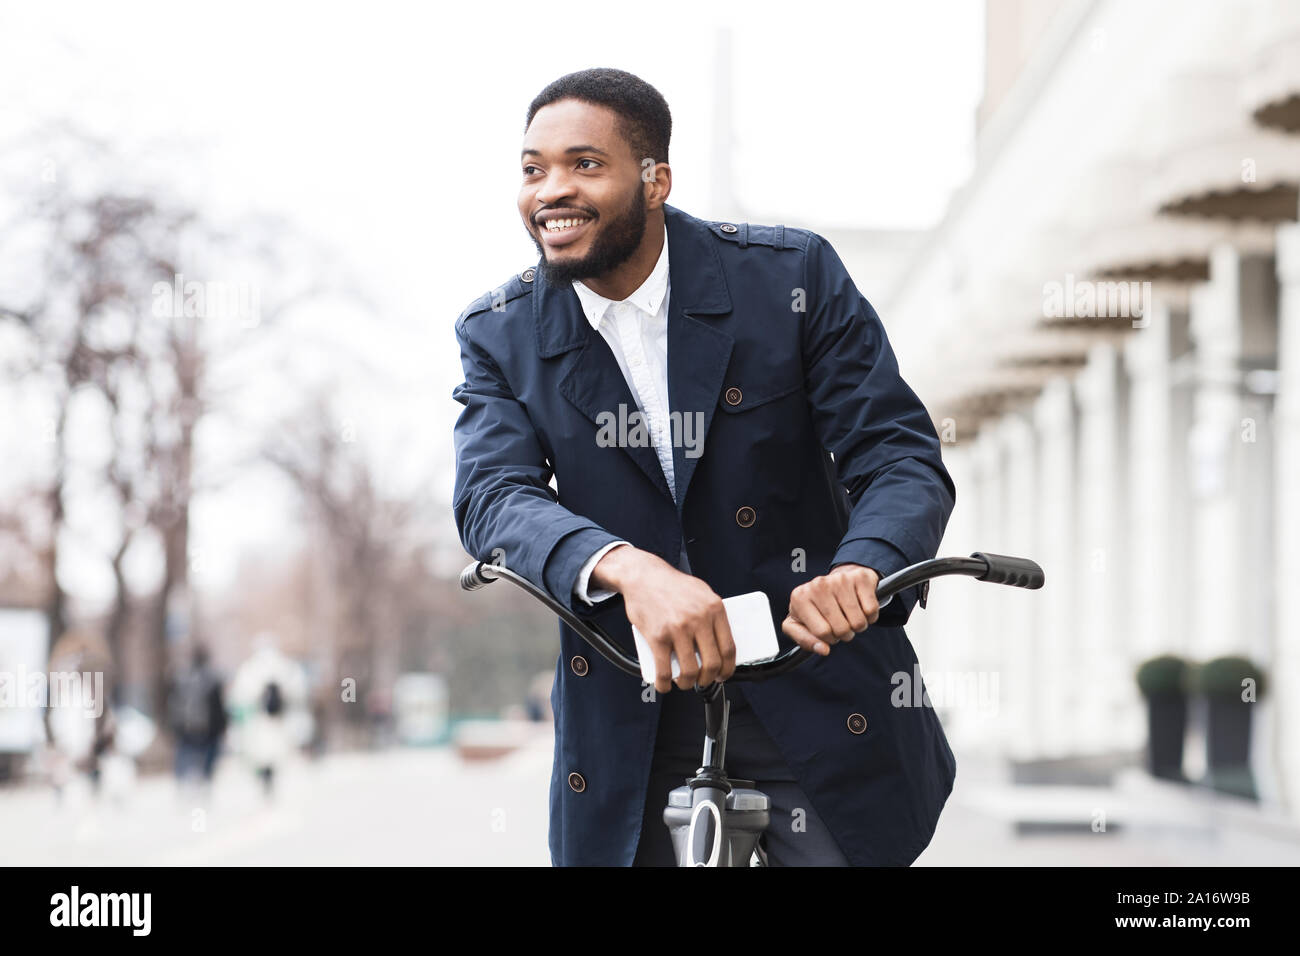 African american man in suit riding on bike to work Stock Photo